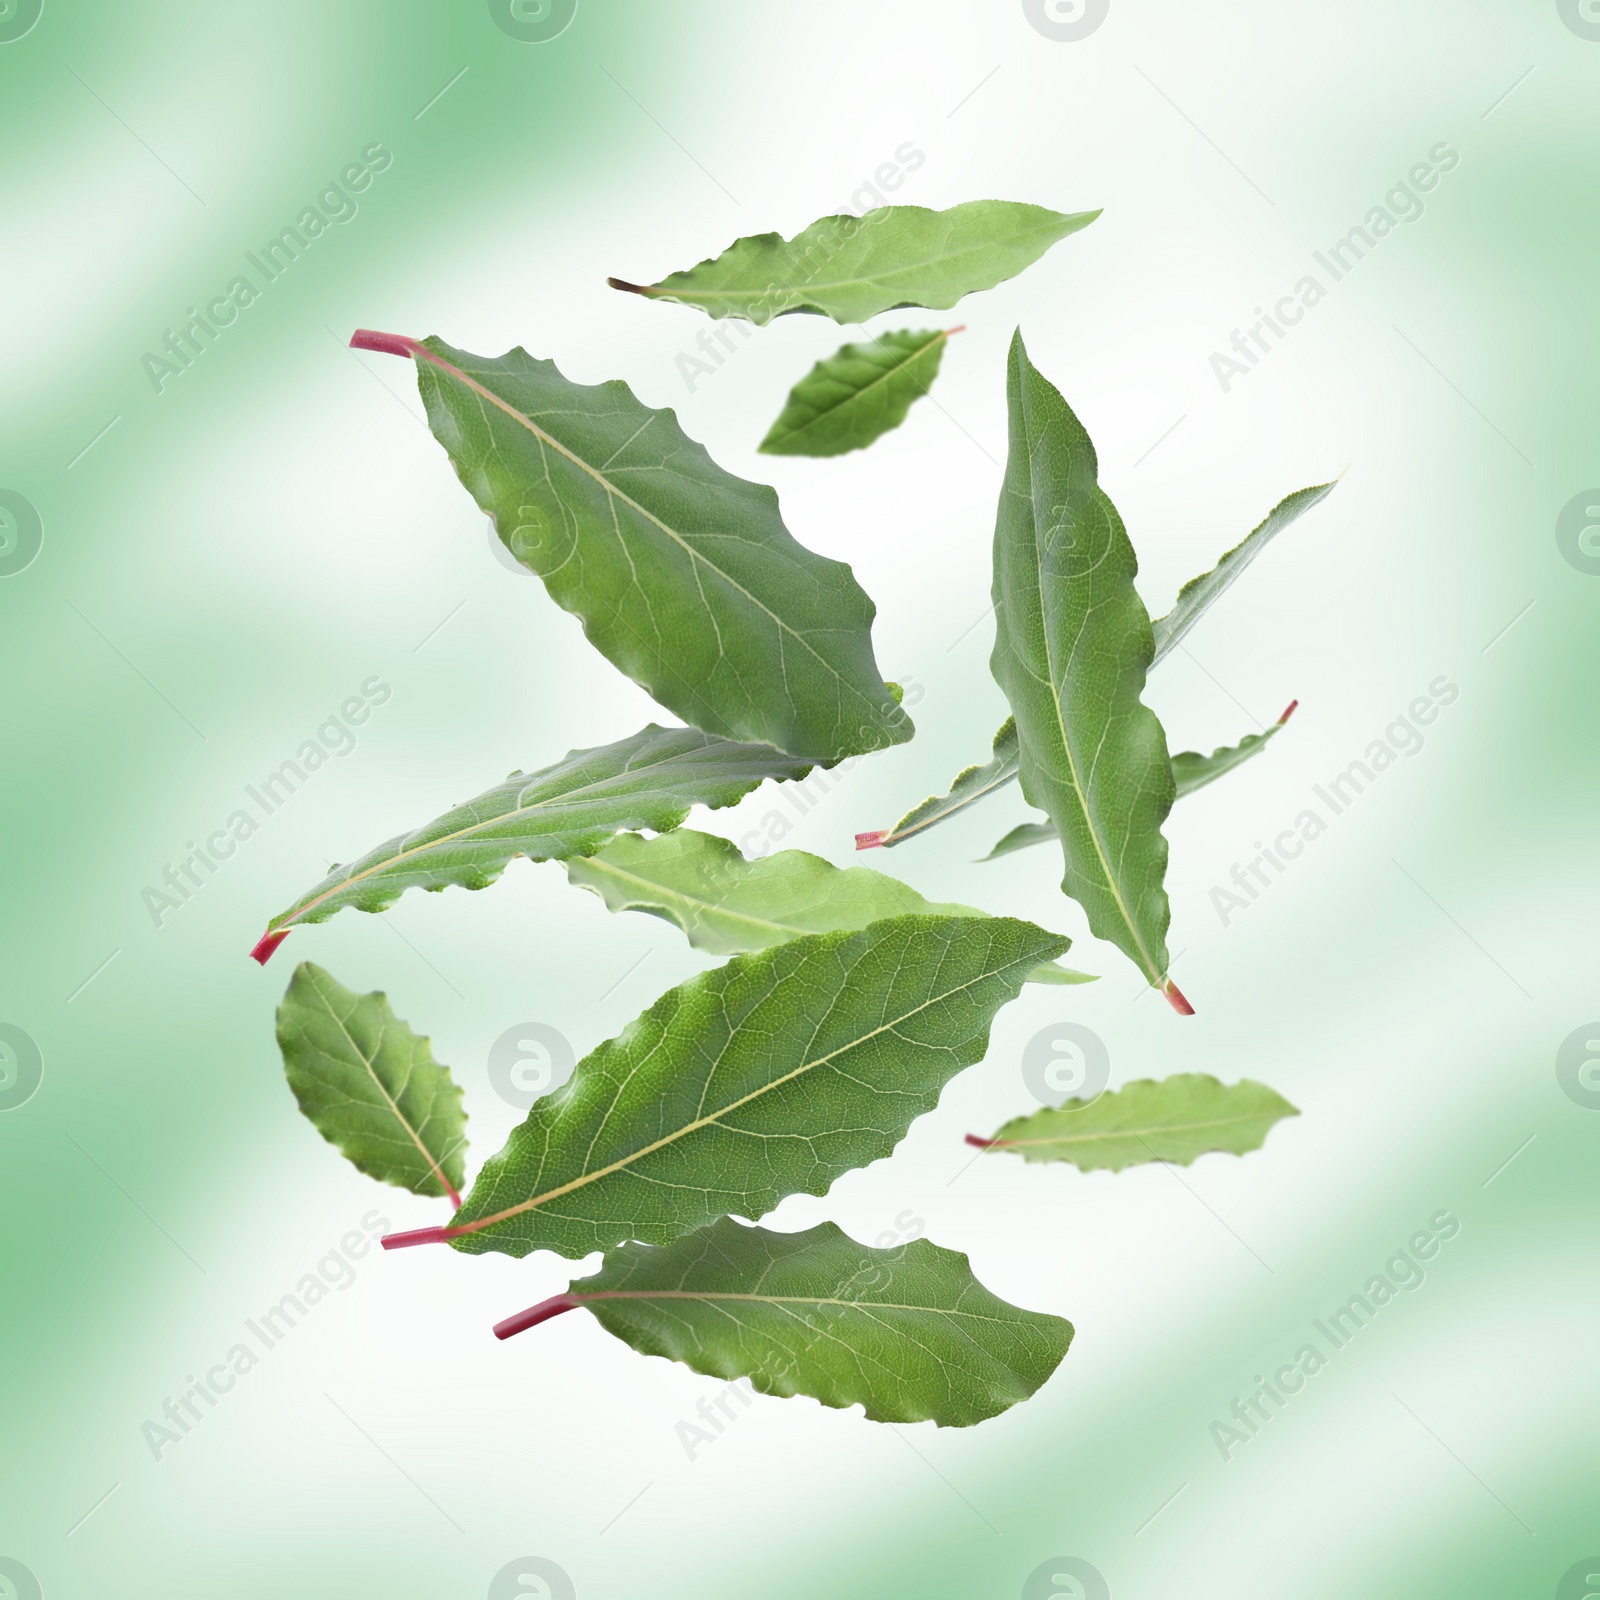 Image of Fresh bay leaves falling on color background